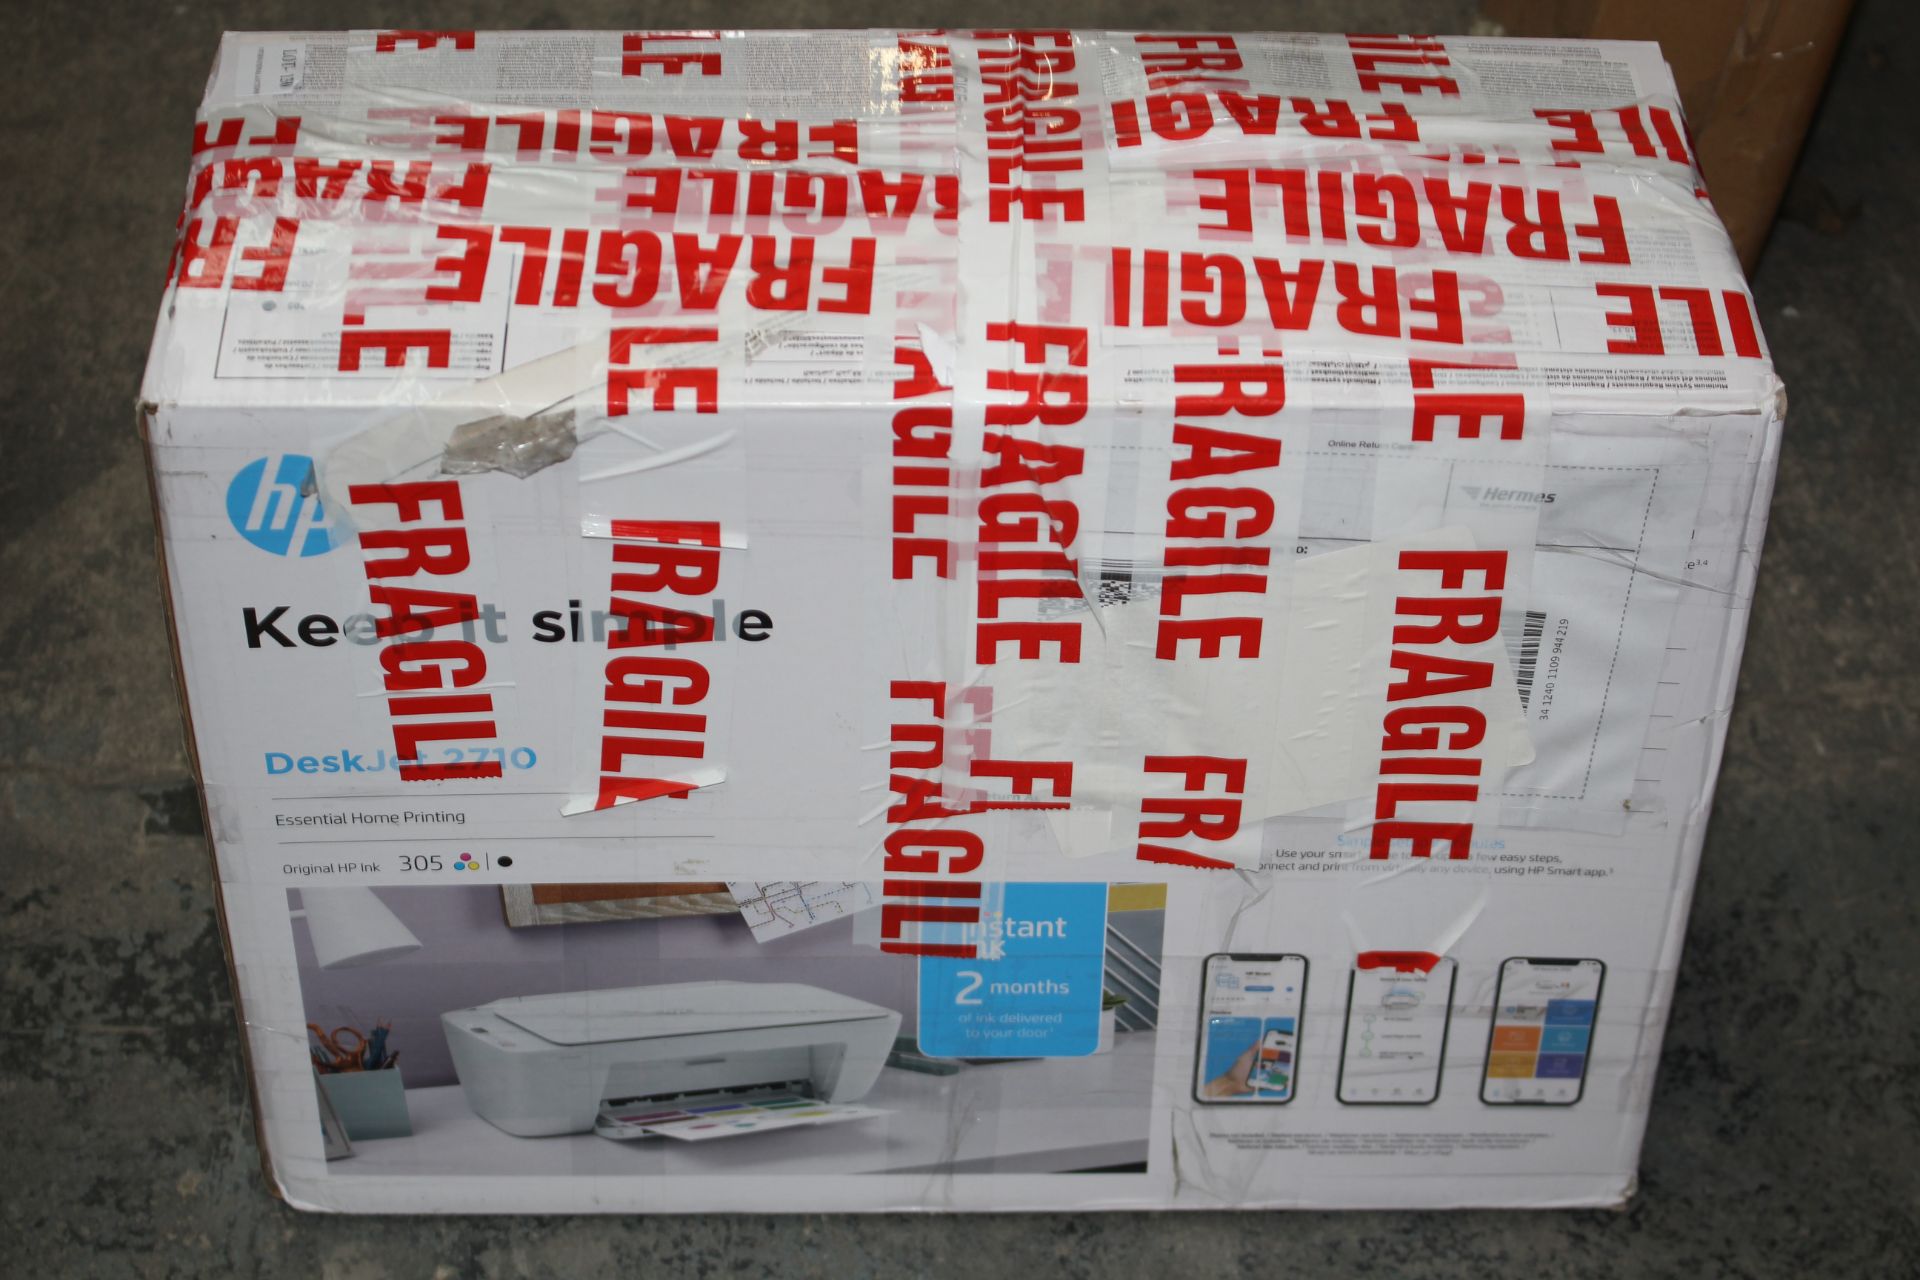 BOXED HP DESKJET 2710 PRINTER RRP £40.00Condition ReportAppraisal Available on Request- All Items